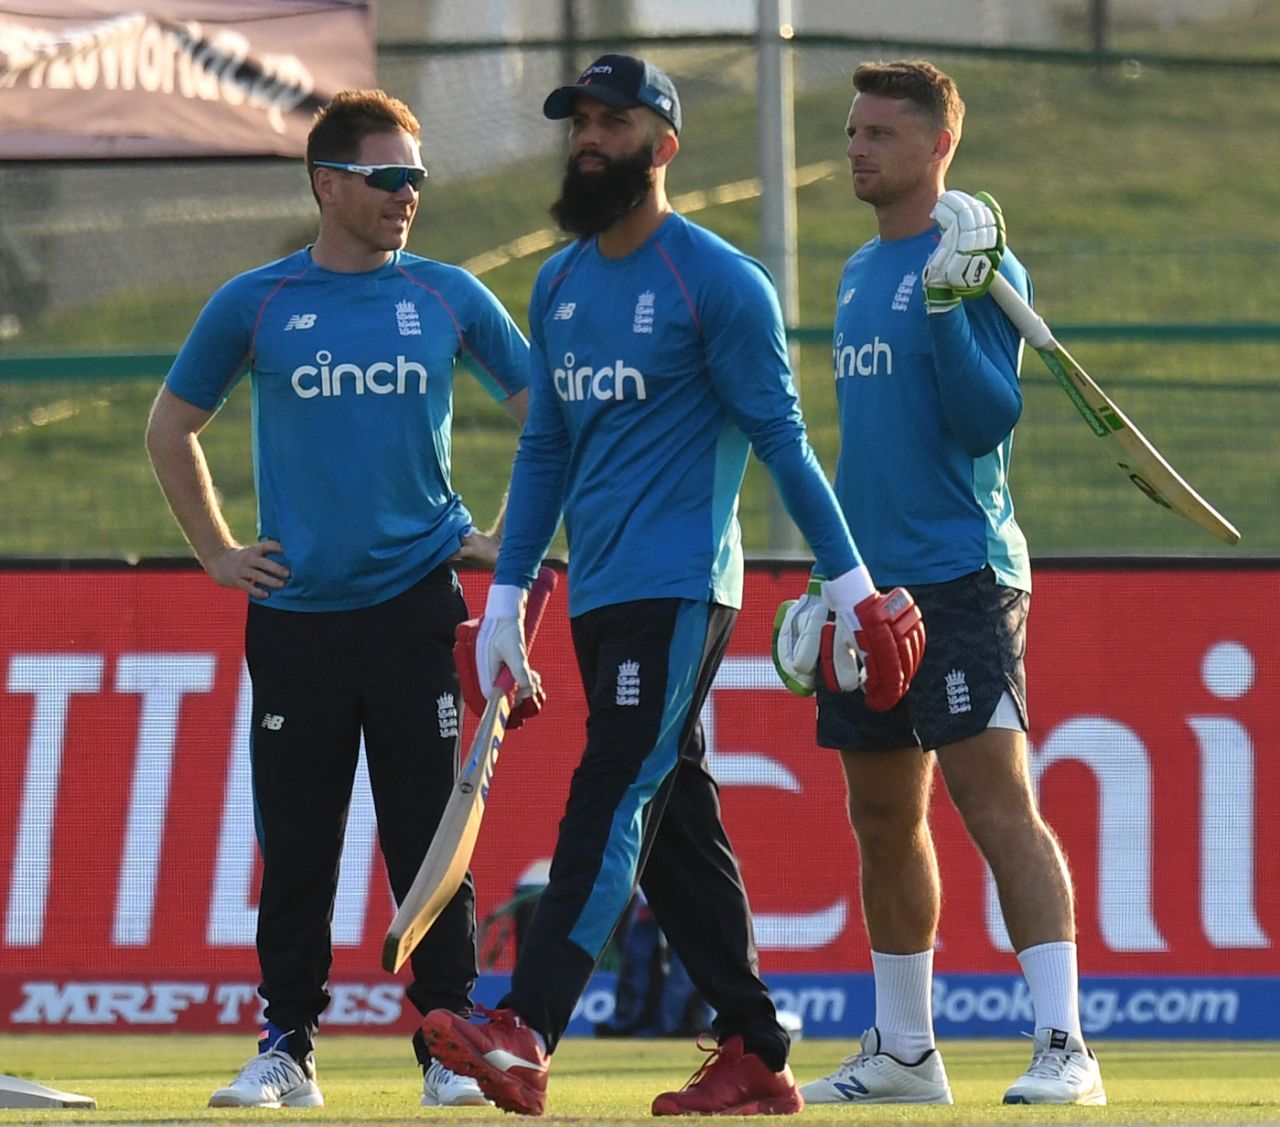 India Tour of England: Eoin Morgan confirms, Ben Stokes to miss ODI & T20 series against India, 'To focus on Test until T20 World Cup'